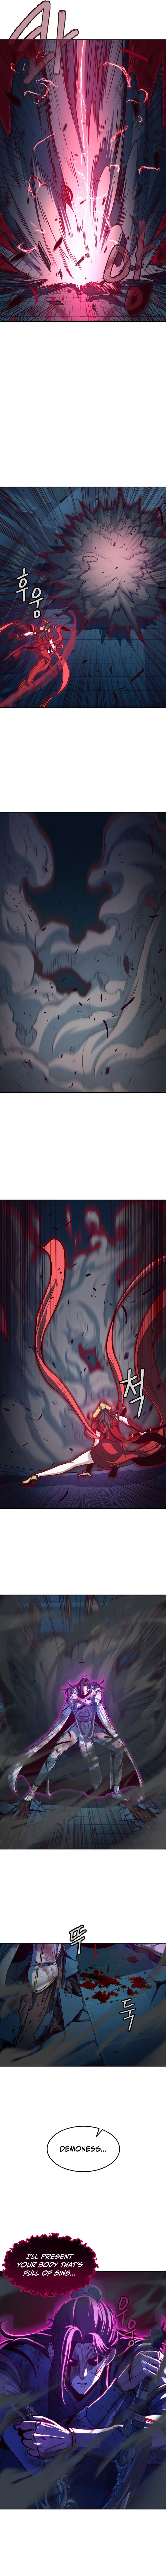 Sword Fanatic Wanders Through The Night Chapter 20 page 6